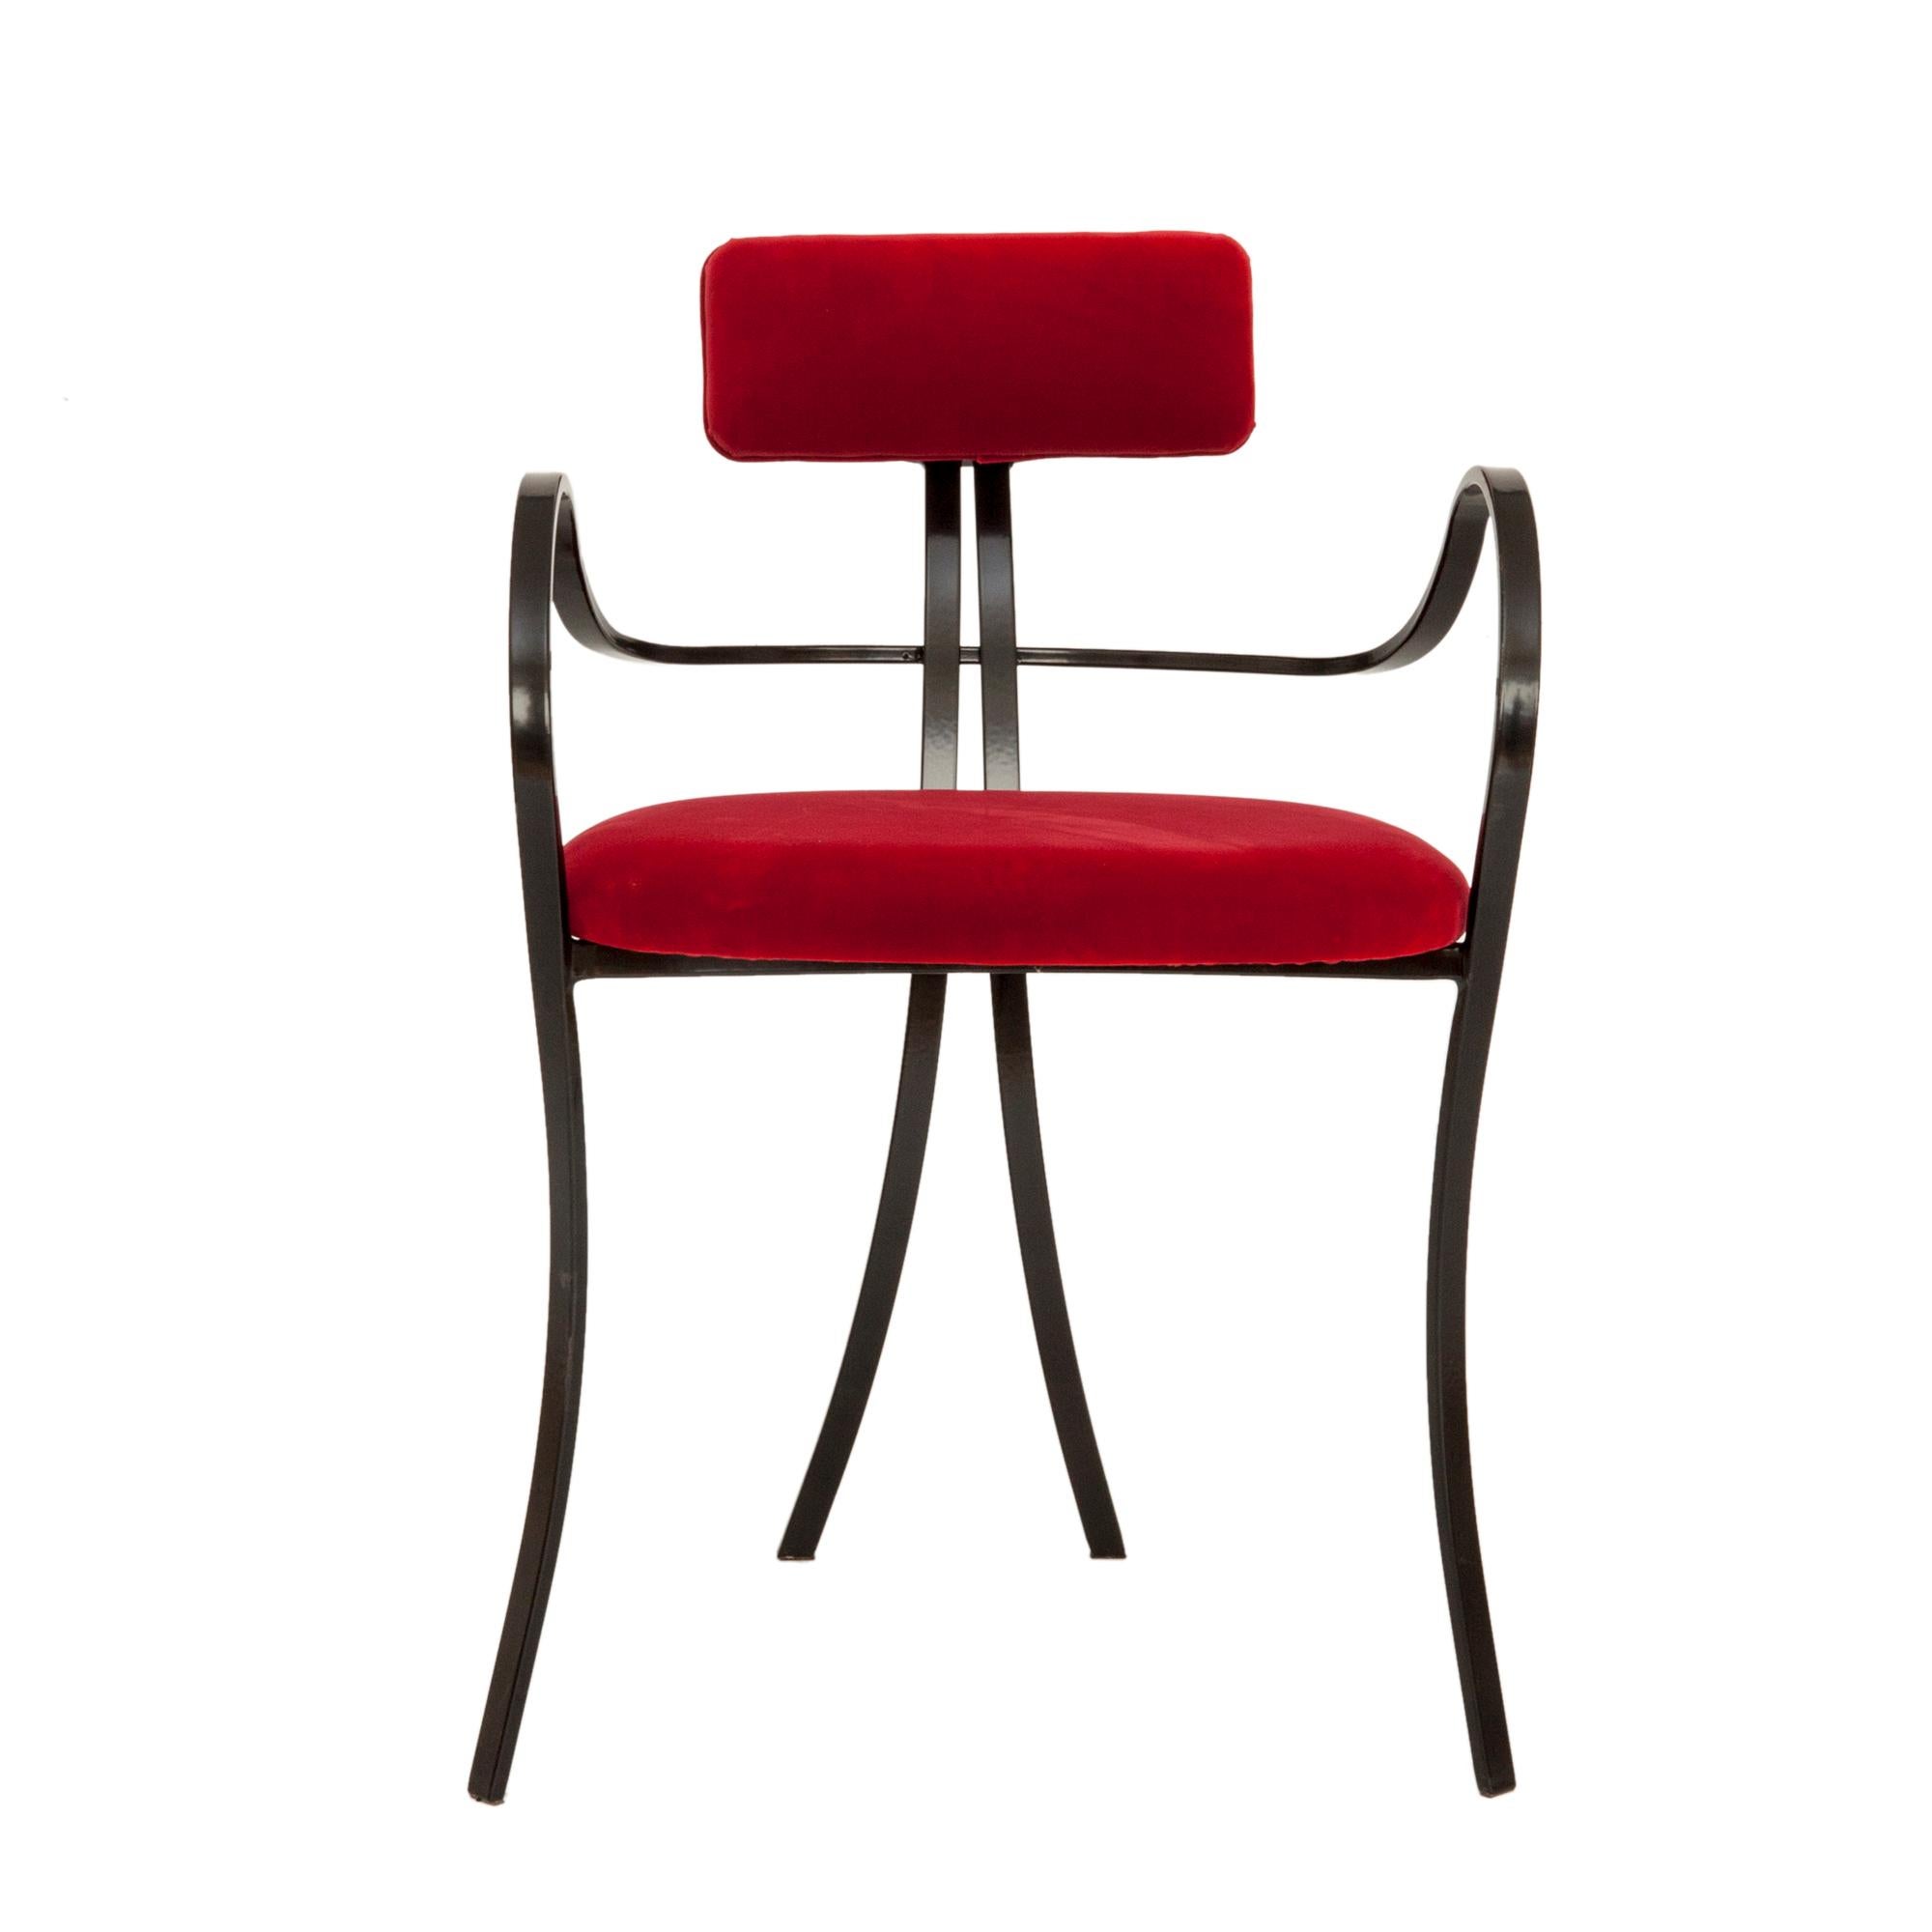 Contemporary Violet Chair with Velvet Seat and Seatback in Red Color For Sale